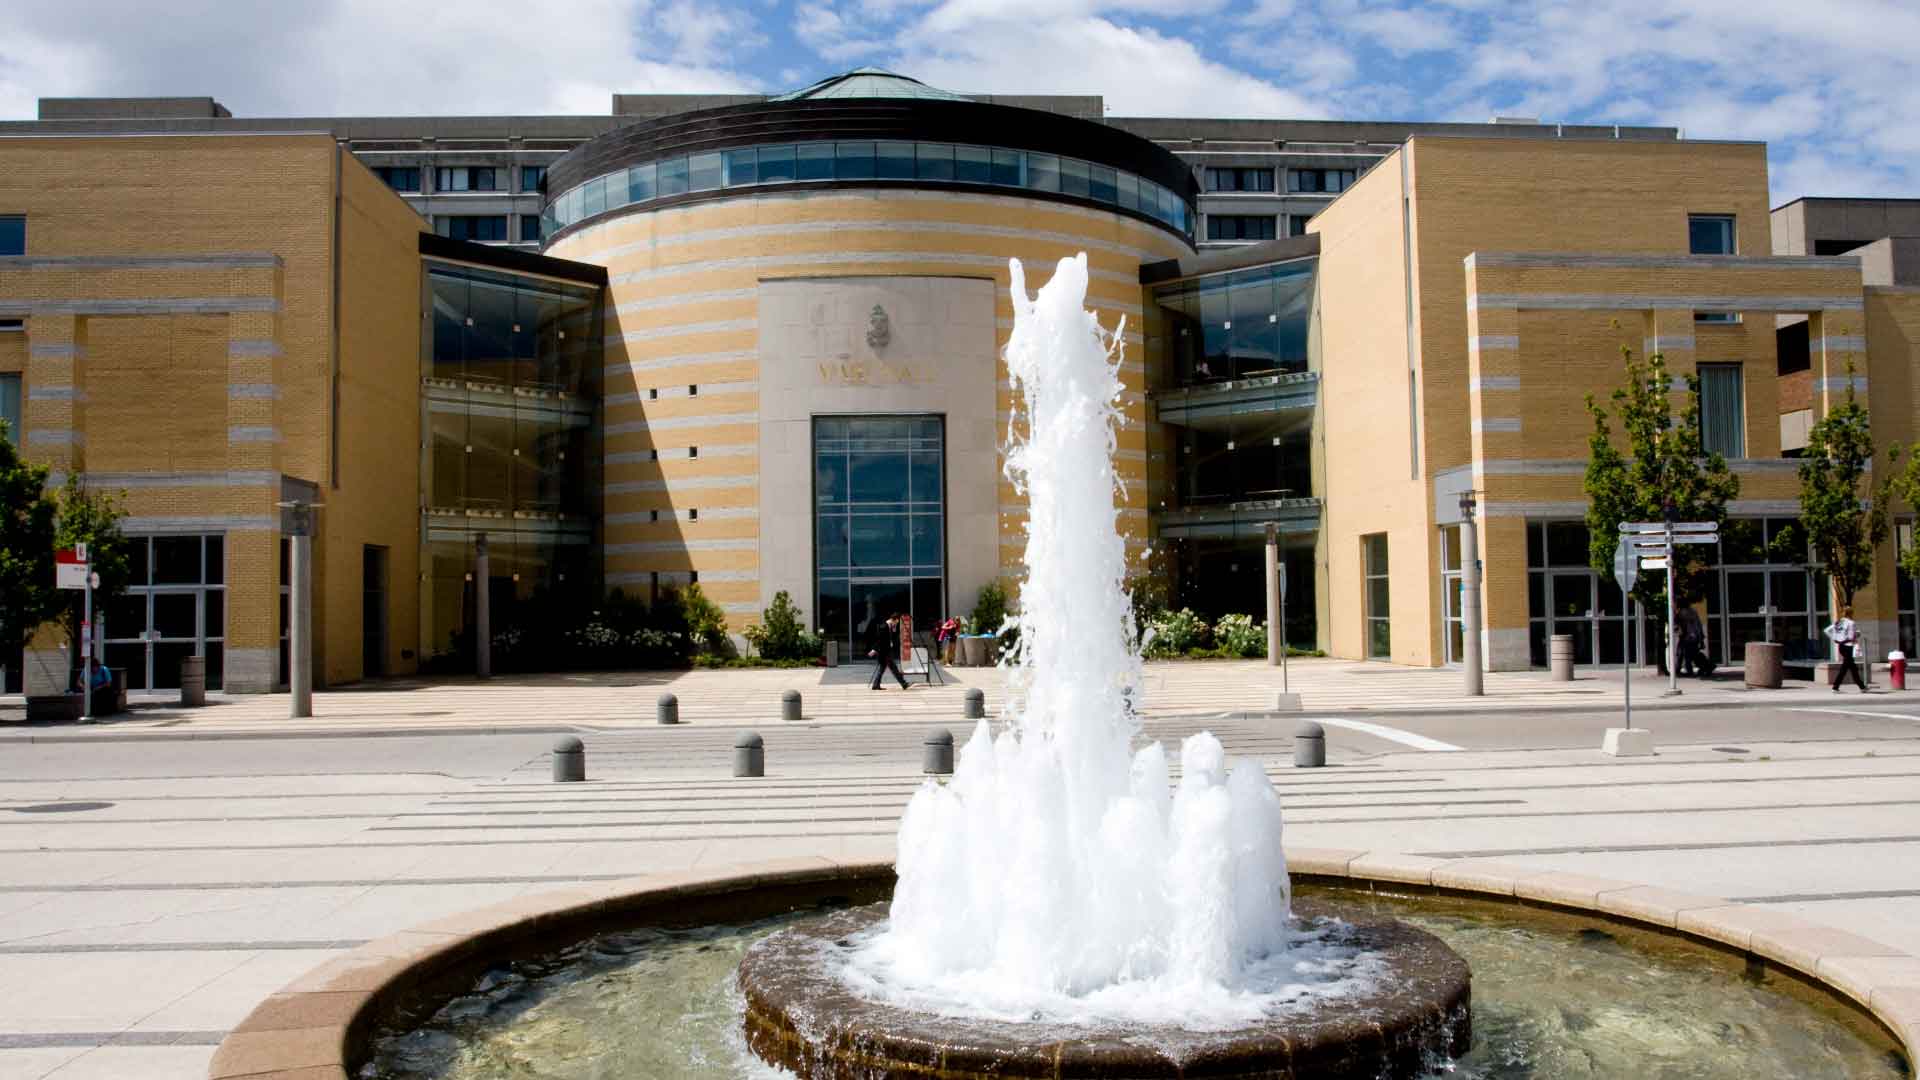 Fountain in front of Vari Hall at York University